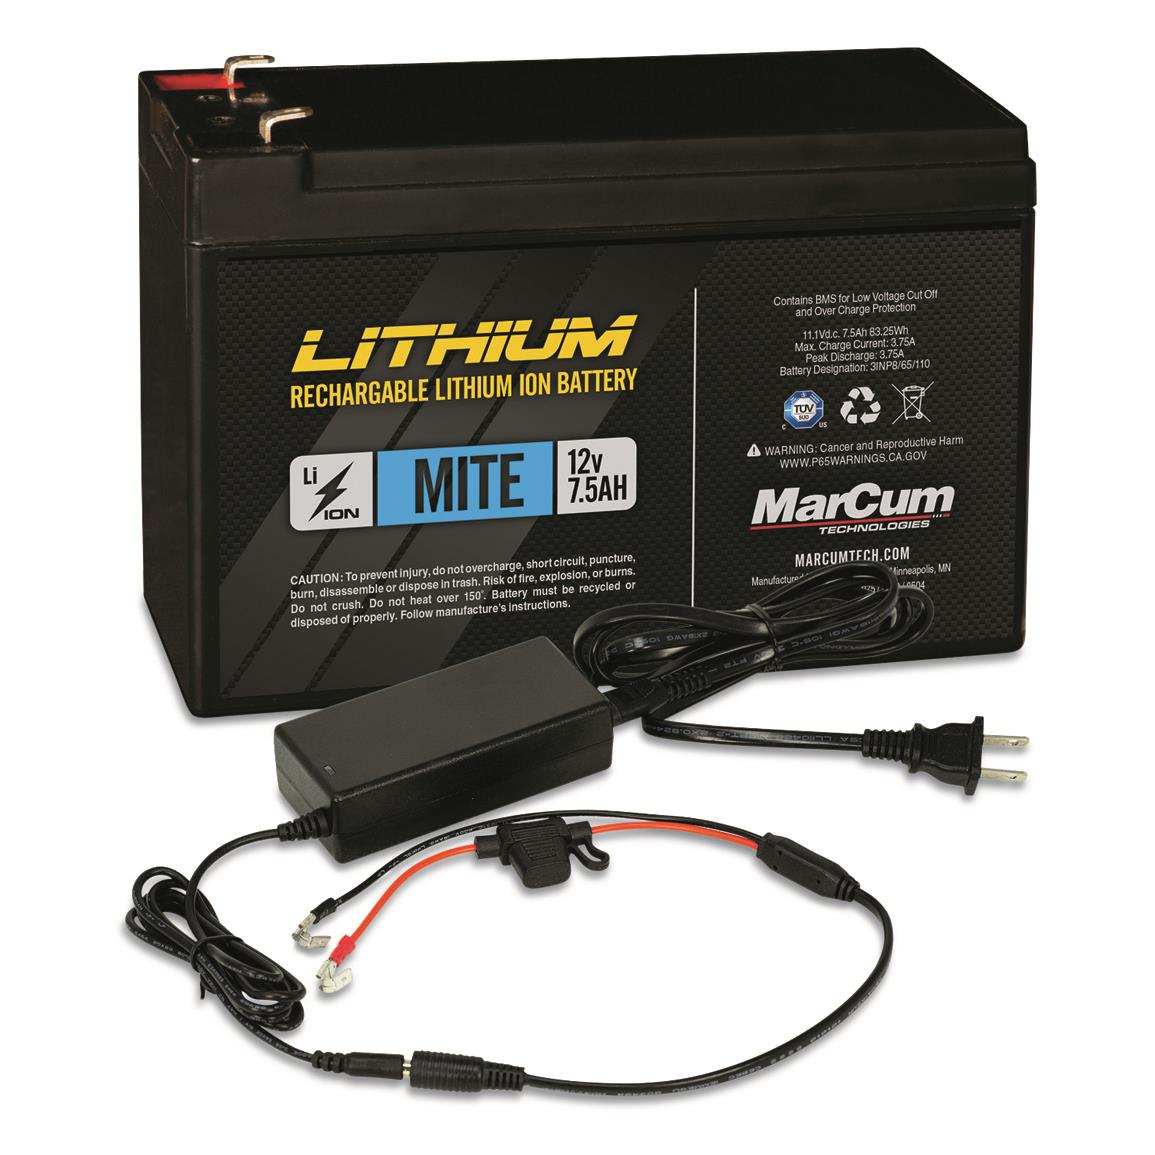 MarCum Mite 12V 7.5Ah Lithium-Ion Battery and 3-Amp Charger Kit